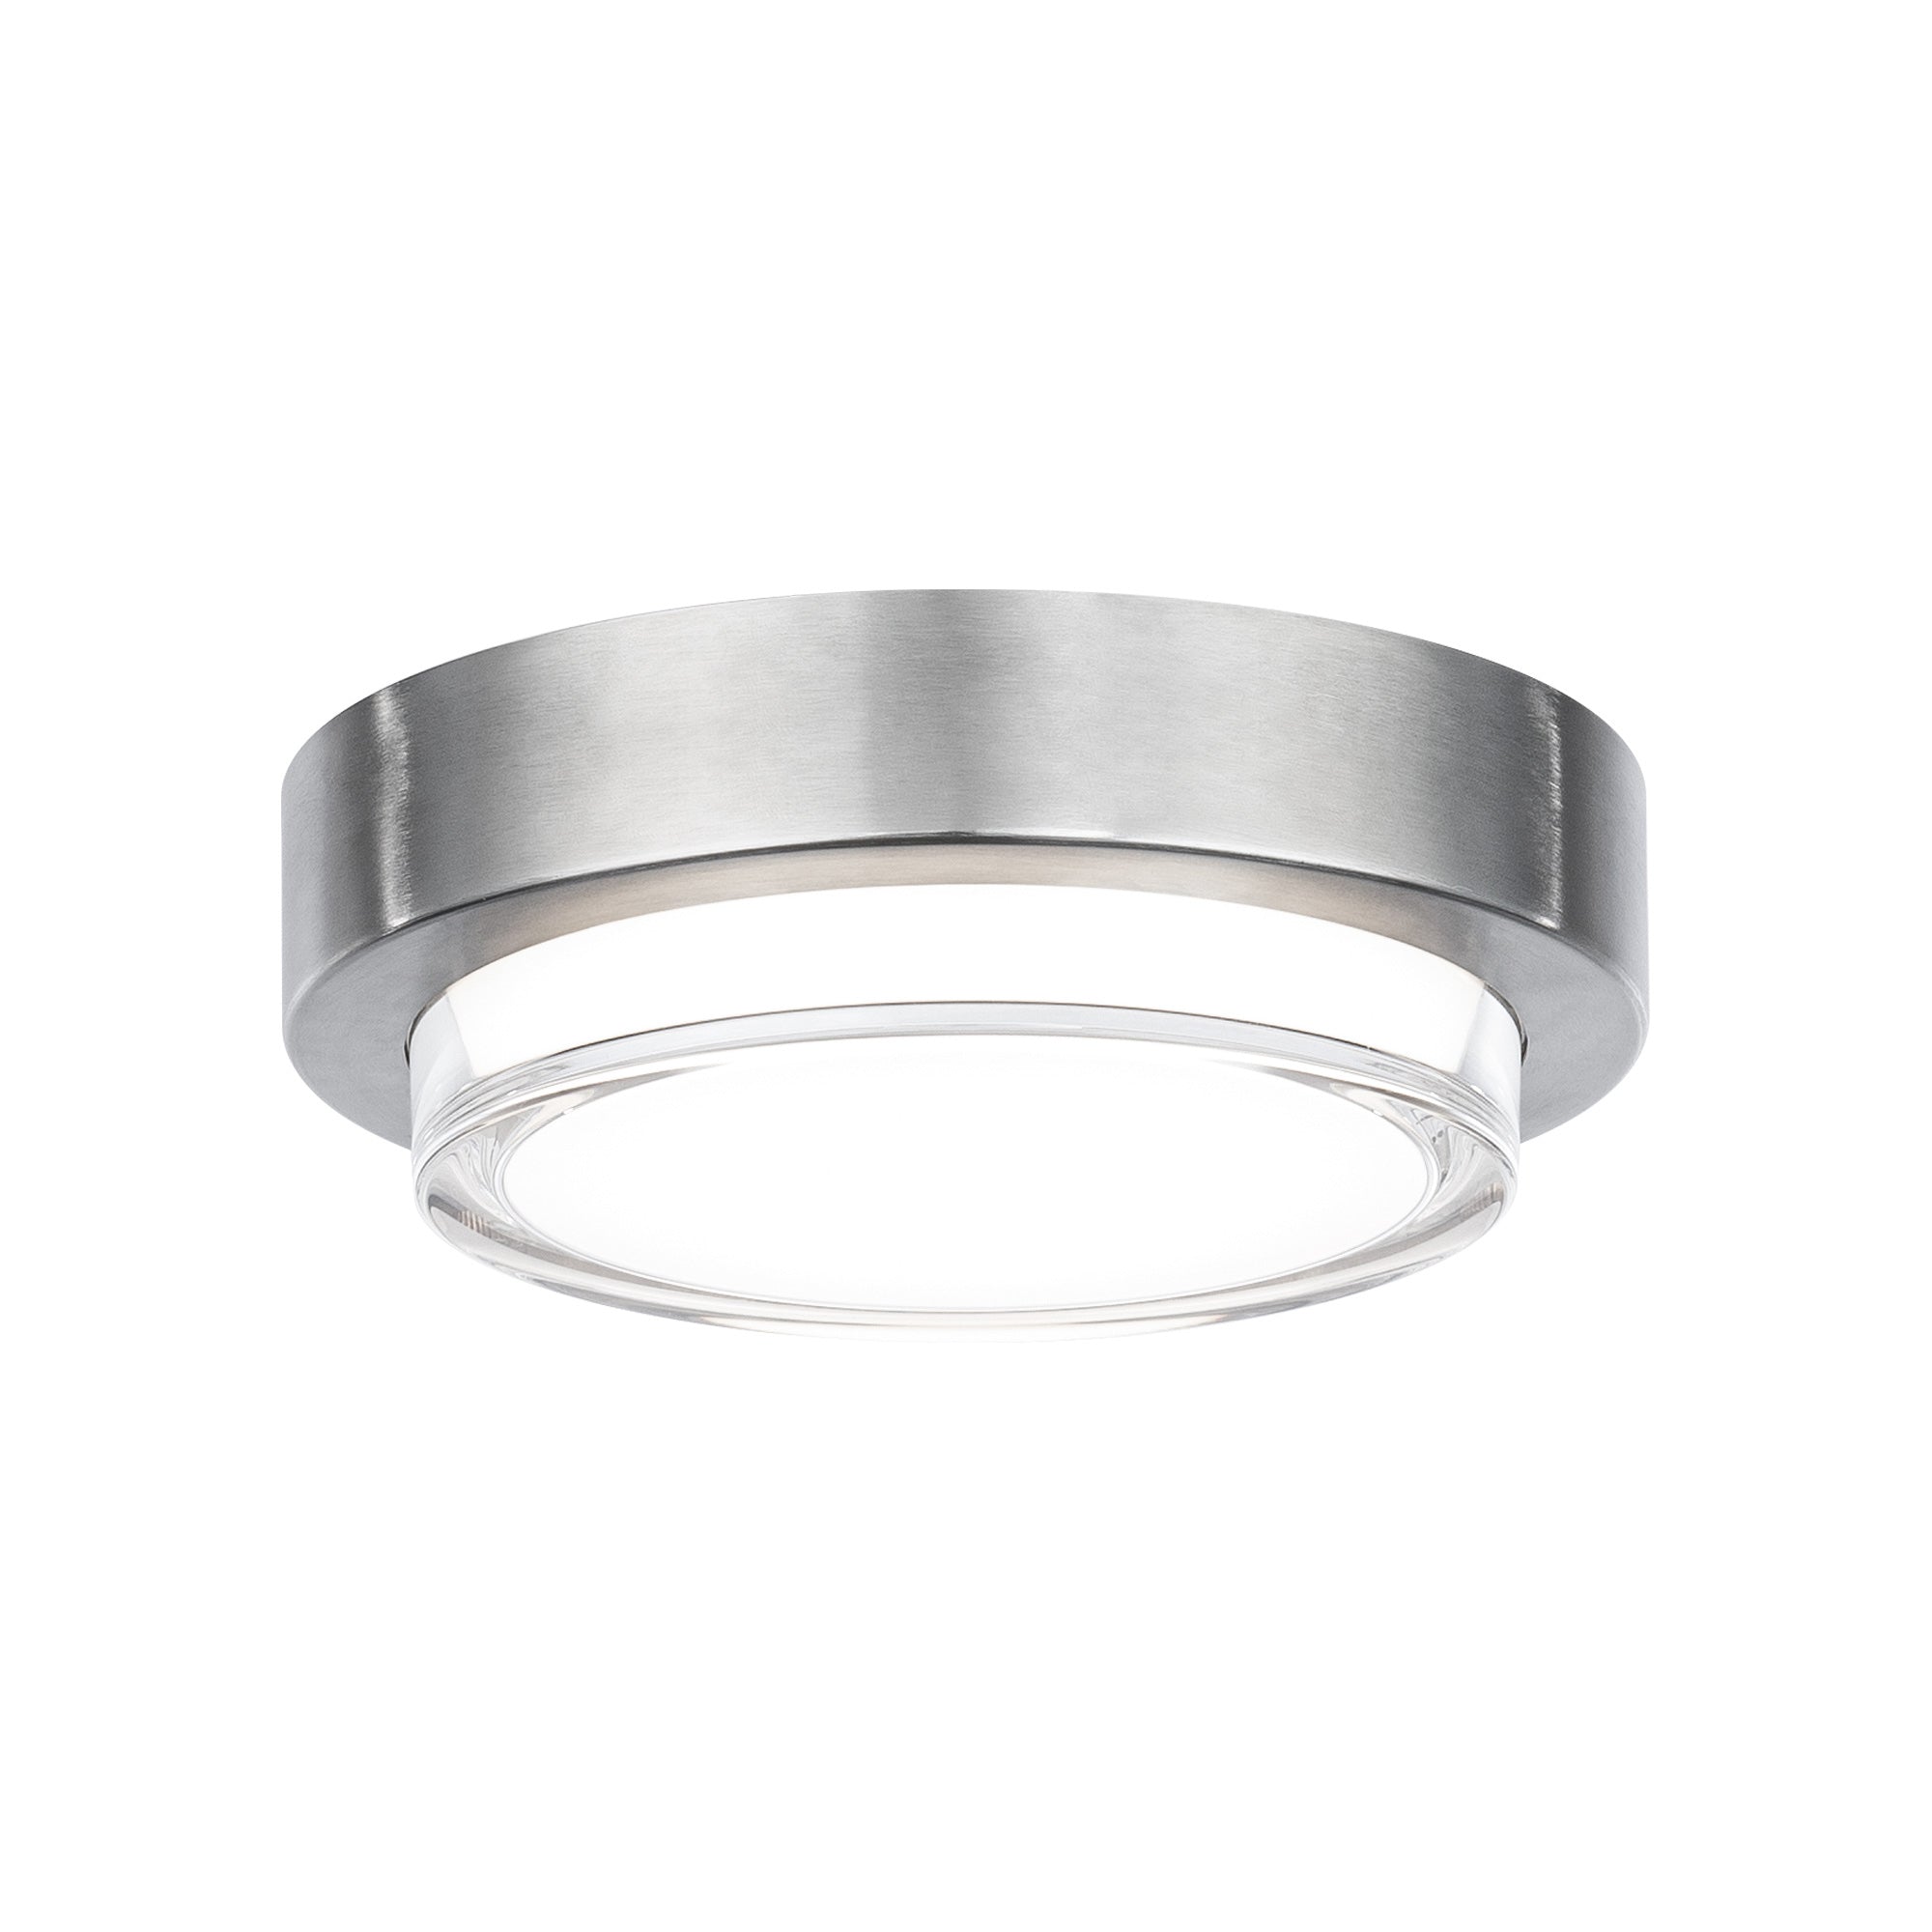 KIND Flush mount Stainless steel INTEGRATED LED - FM-W76108-30-SS | MODERN FORMS